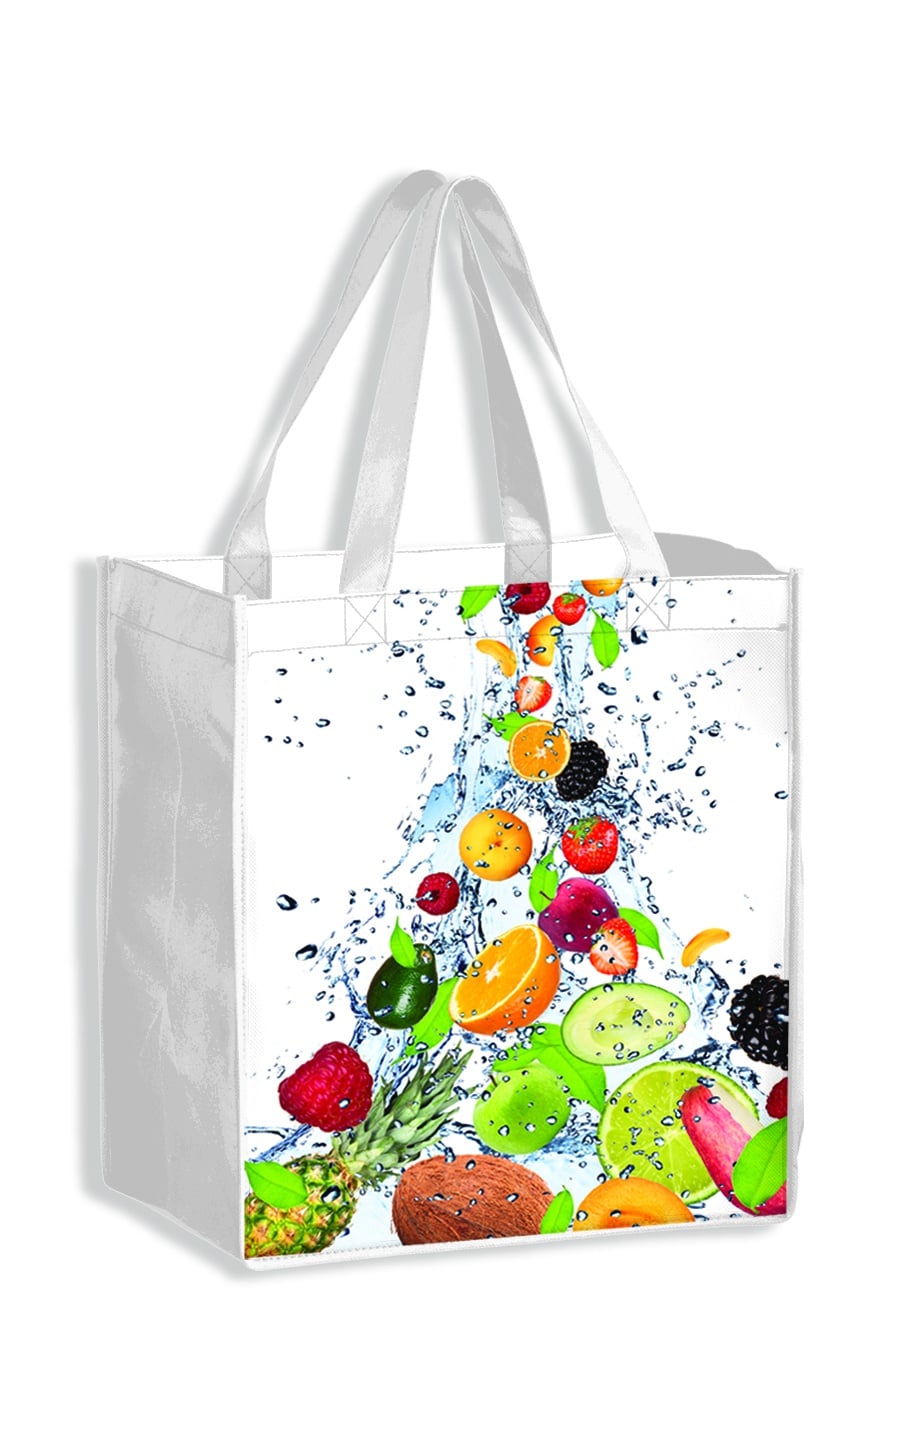 Imprinted Eco-Friendly Non Woven Tote Bags (13.5 x 14.5)